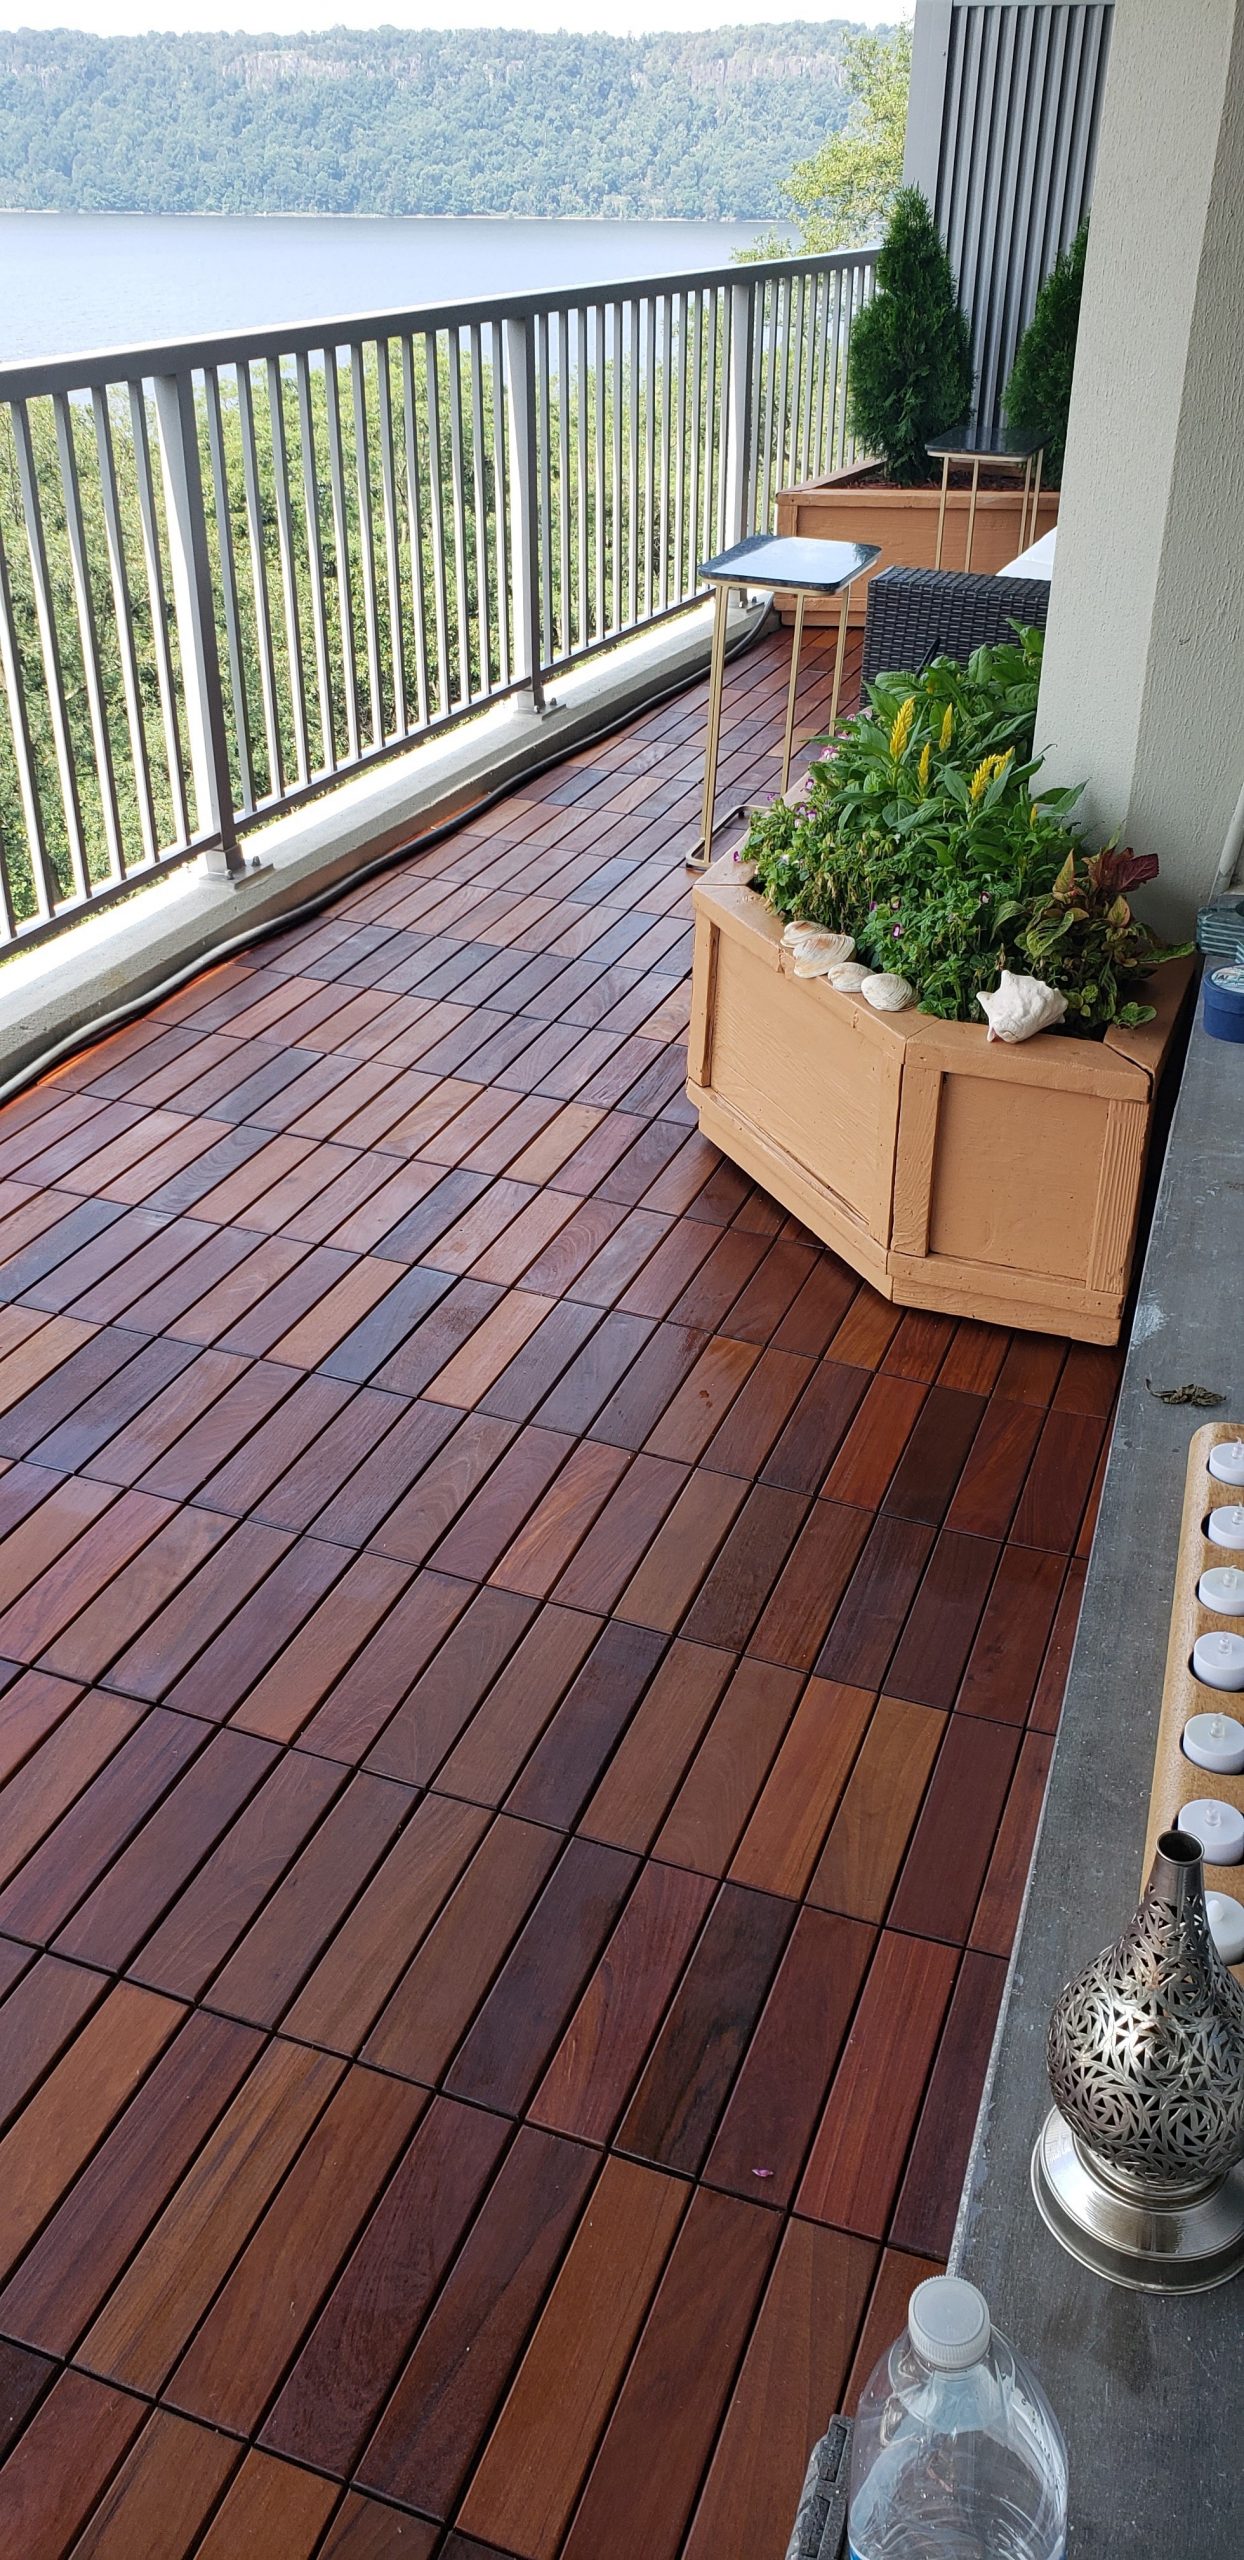 Showcase Ipe Wood Deck Tiles - Coverdeck Systems